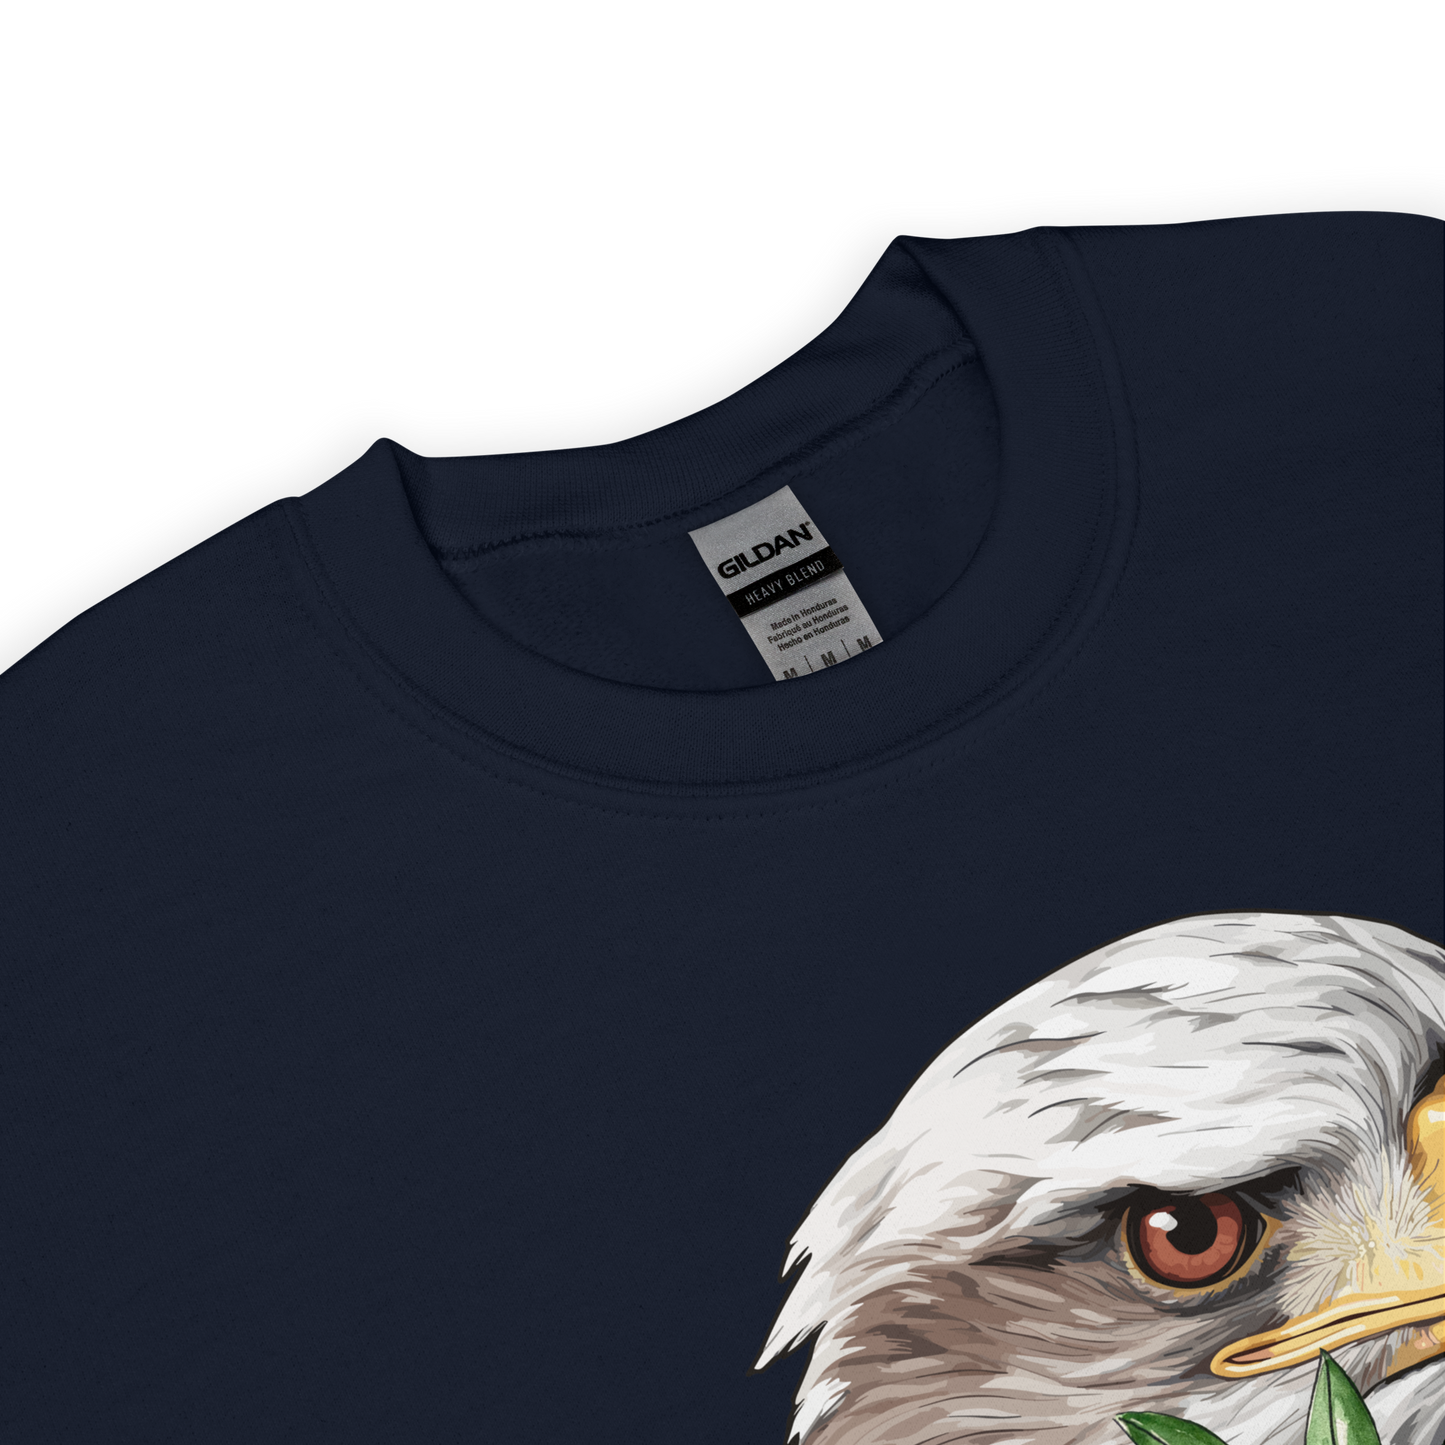 Product details of a Navy Eagle Sweatshirt featuring a vibrant I Am Eagle To Party graphic on the chest - Funny Graphic Eagle Sweatshirts - Boozy Fox